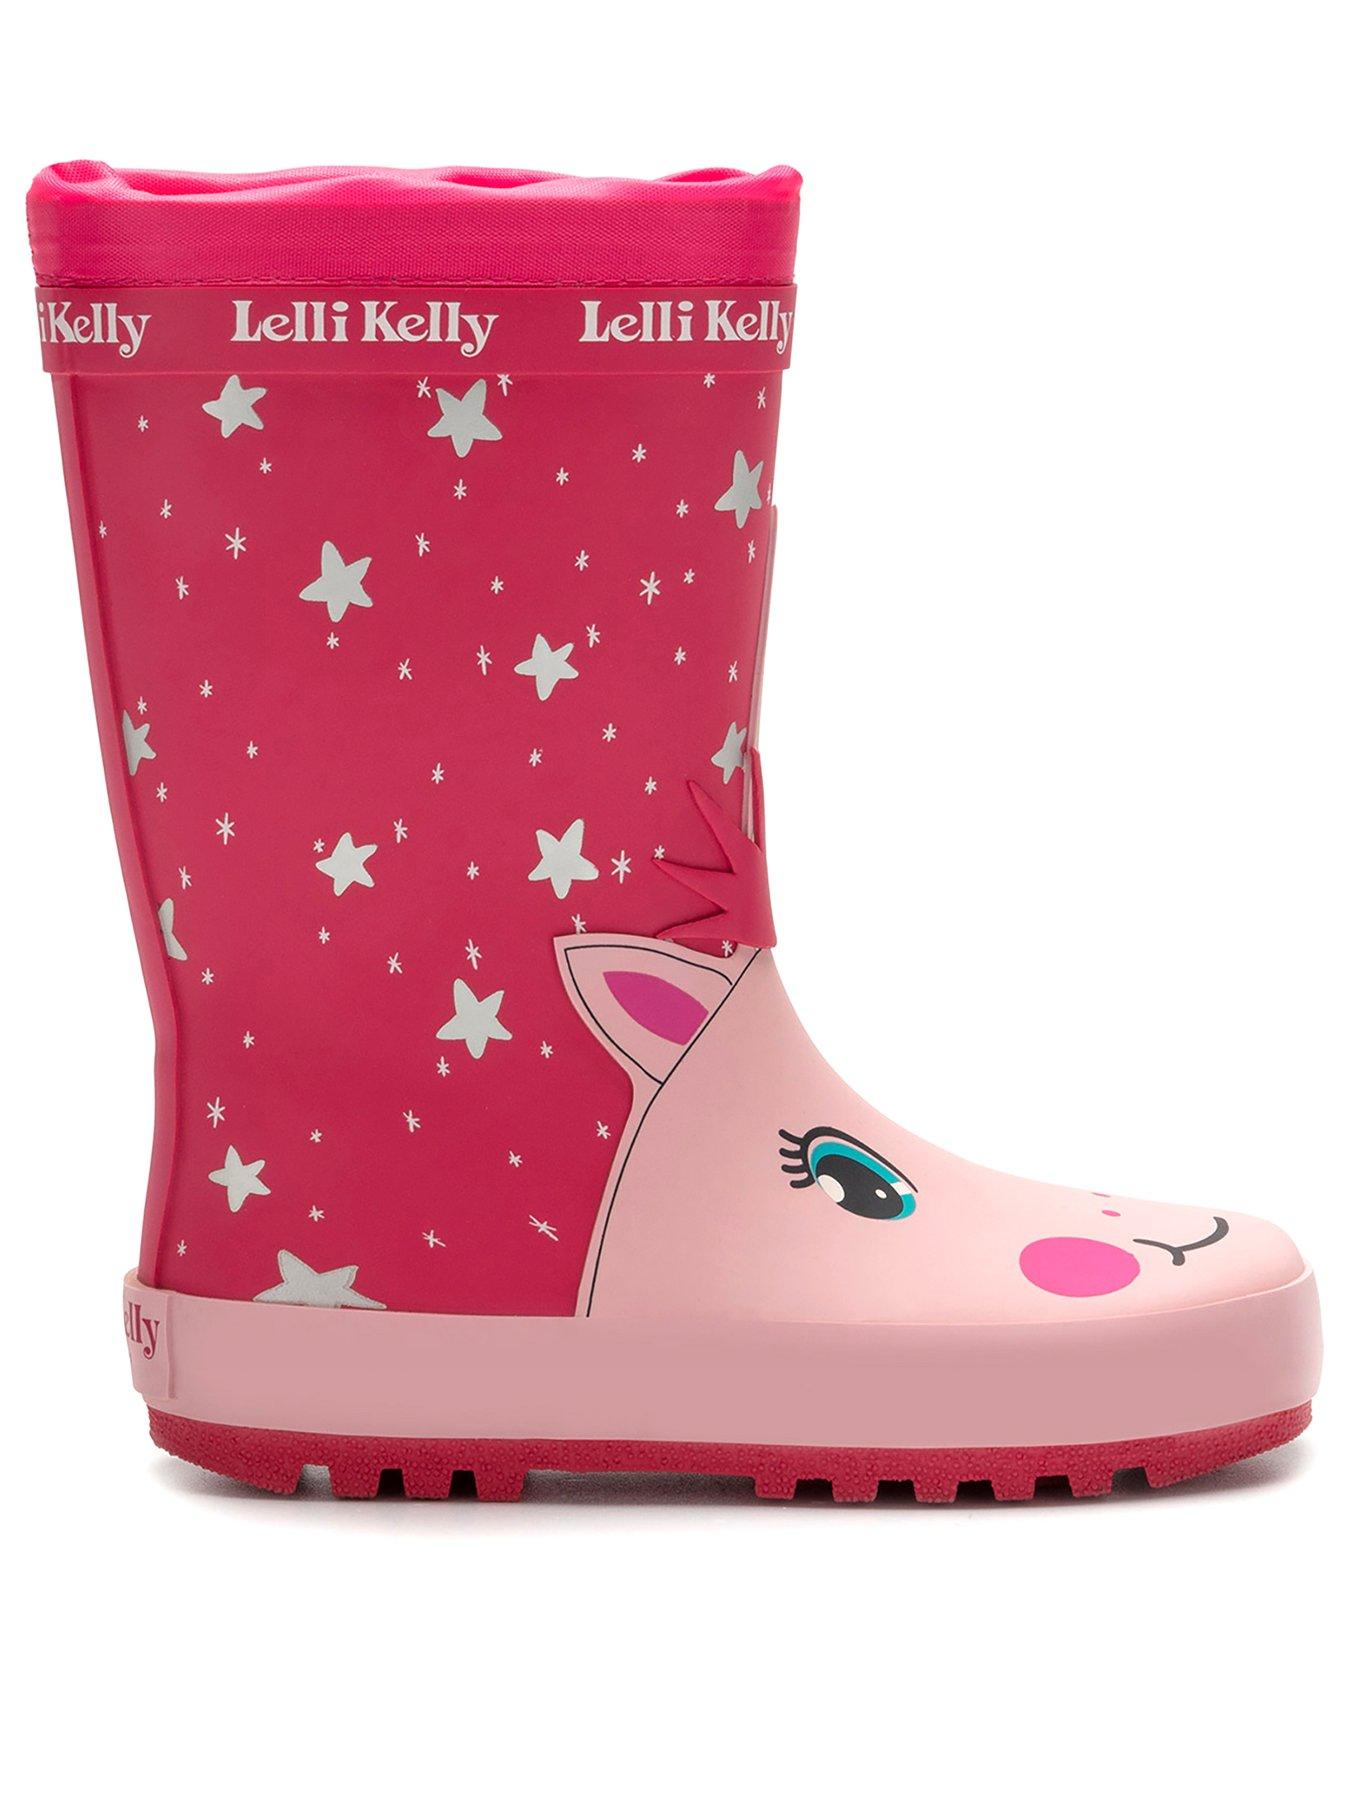 Designer LELLI KELLY Girls Black Patent Winter Boot with Gift WAS £65 NOW £45 